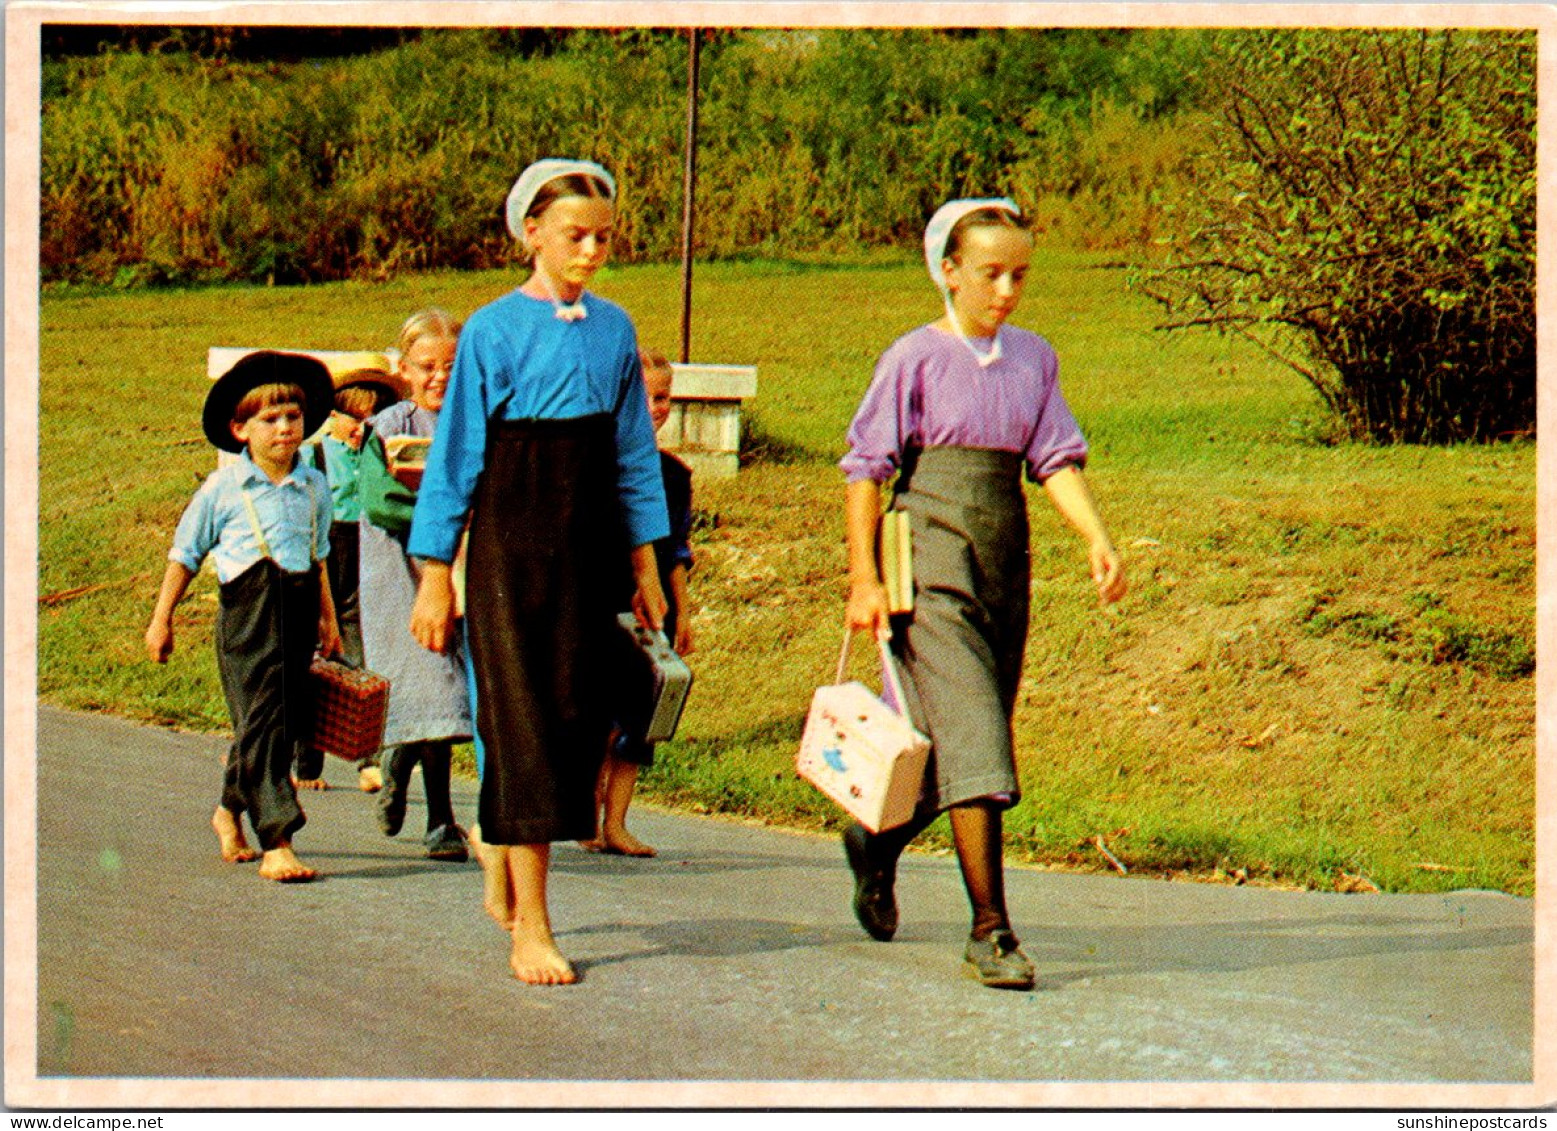 Pennsylvania Amish Country Amish Children Walking Home From School - Lancaster